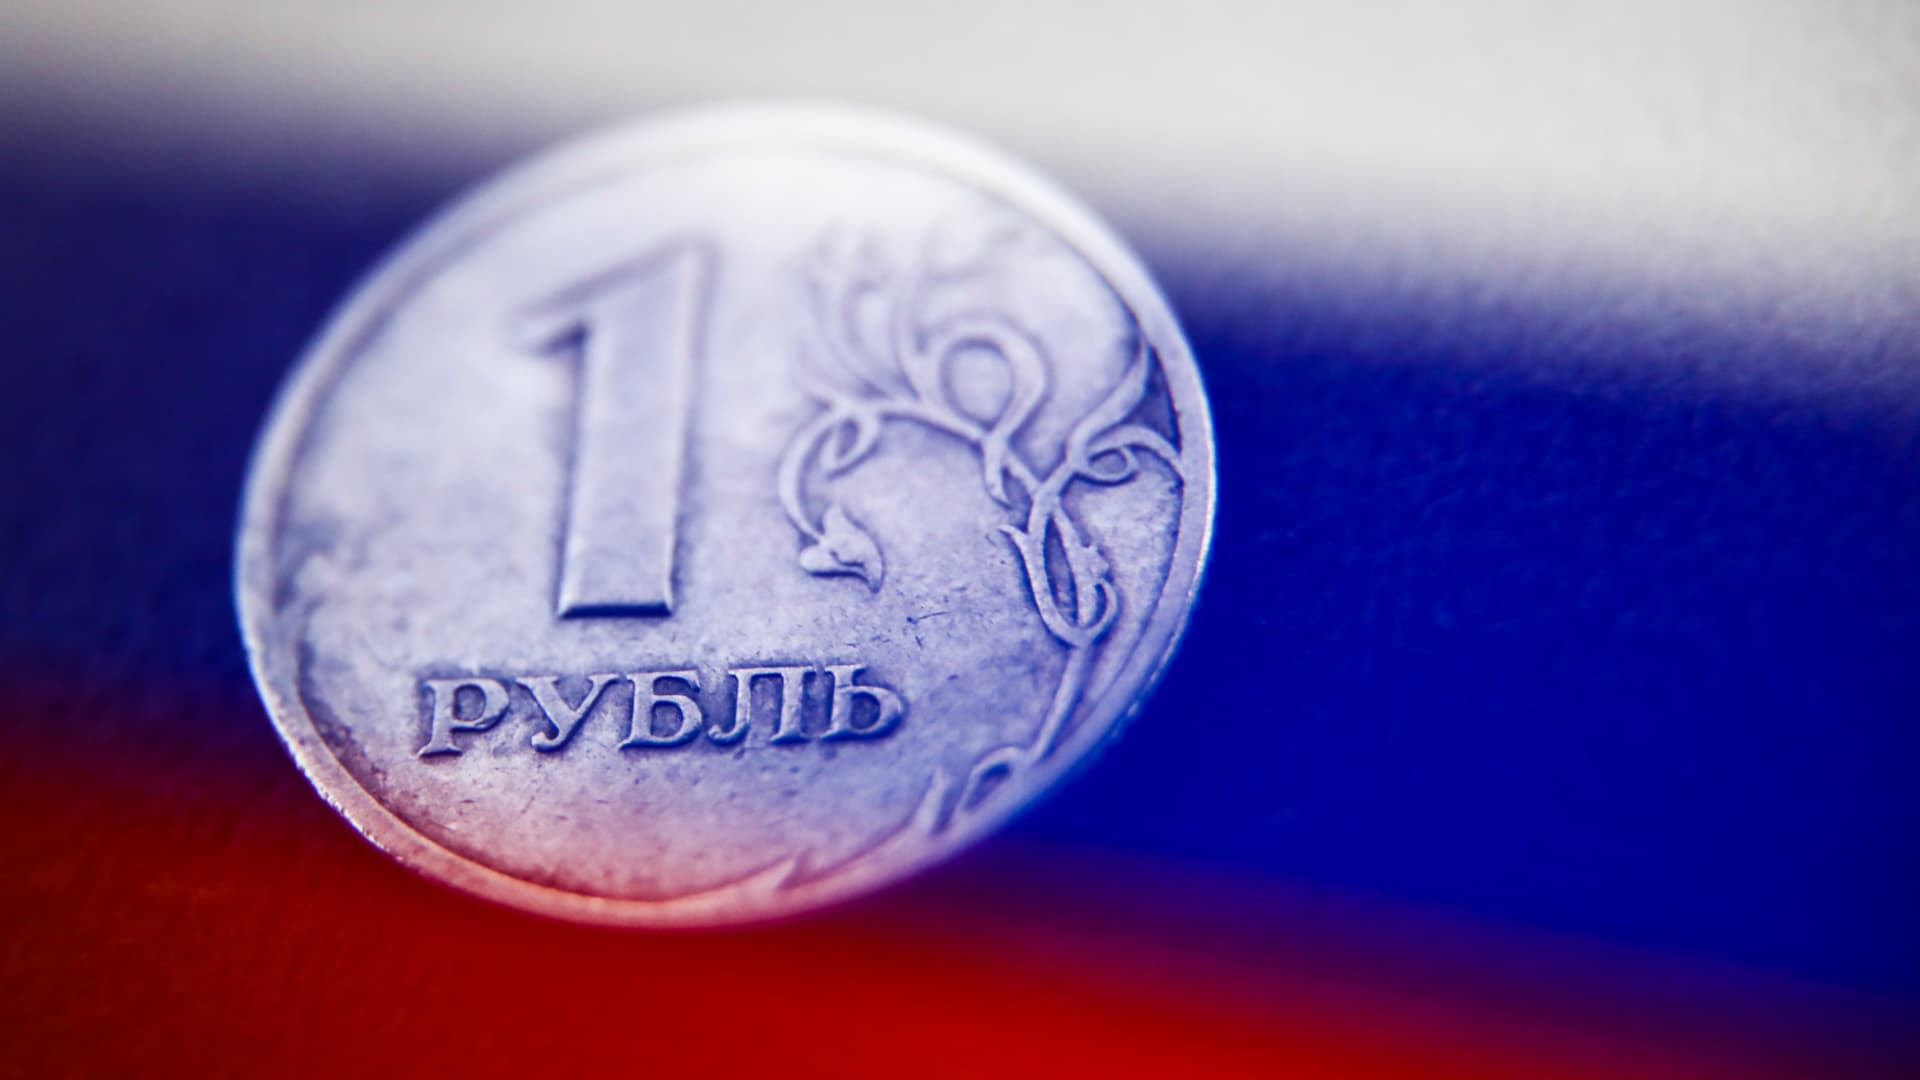 Russia's ruble hit its strongest level in 7 years despite massive sanctions. Here's why